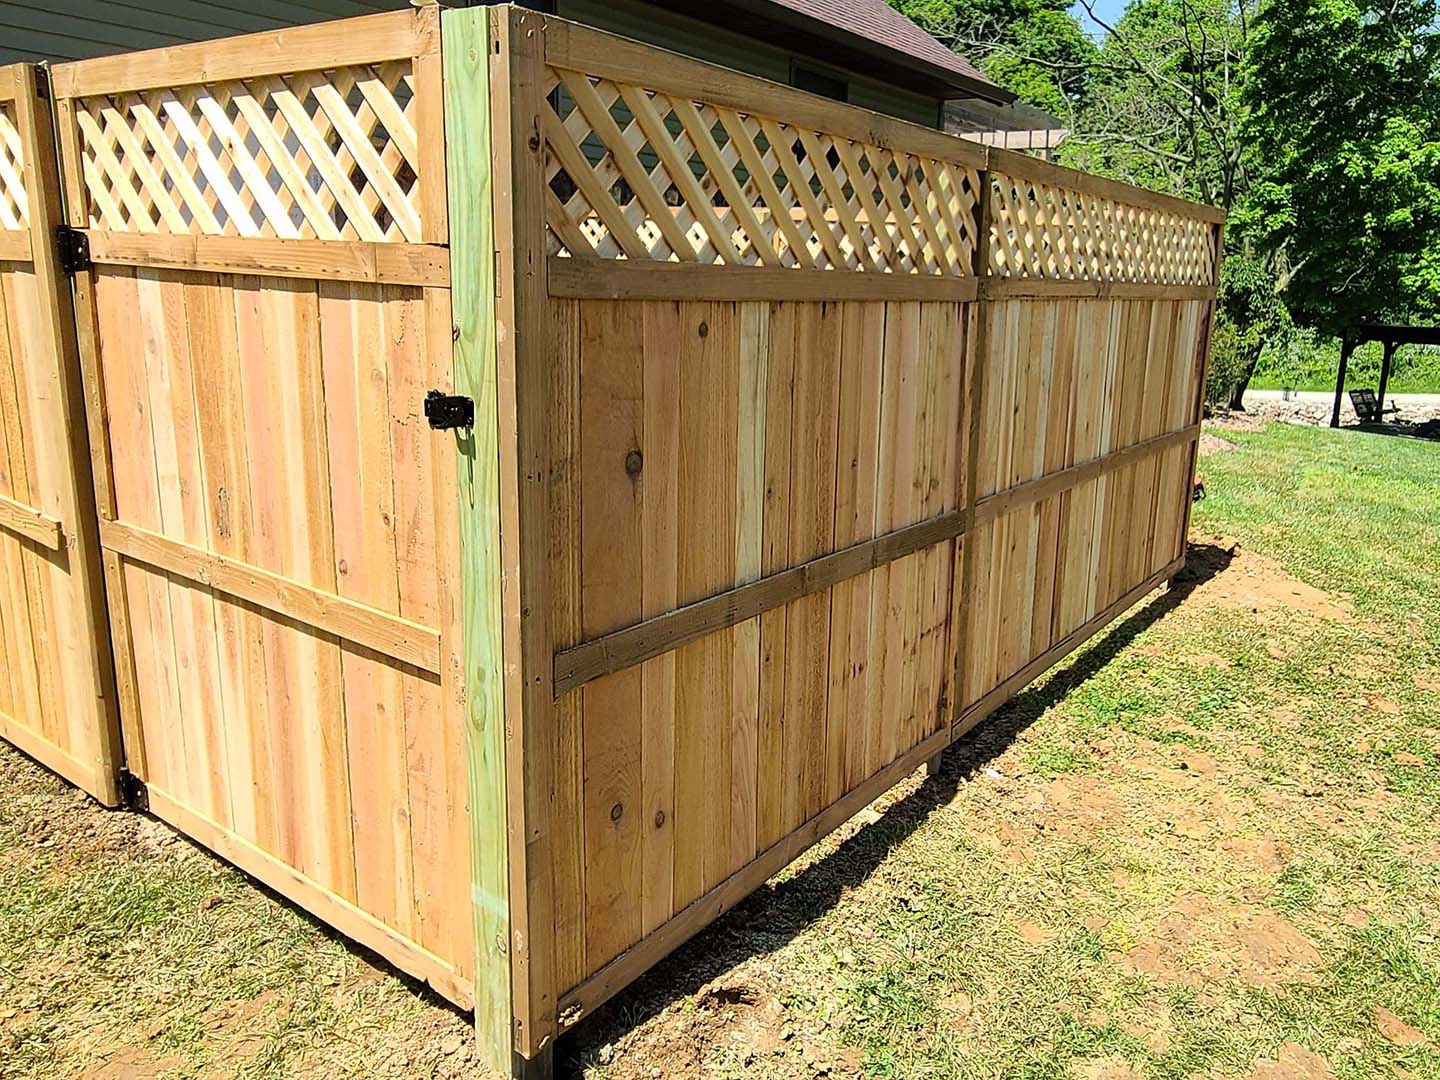 Bloomington Indiana residential fencing company